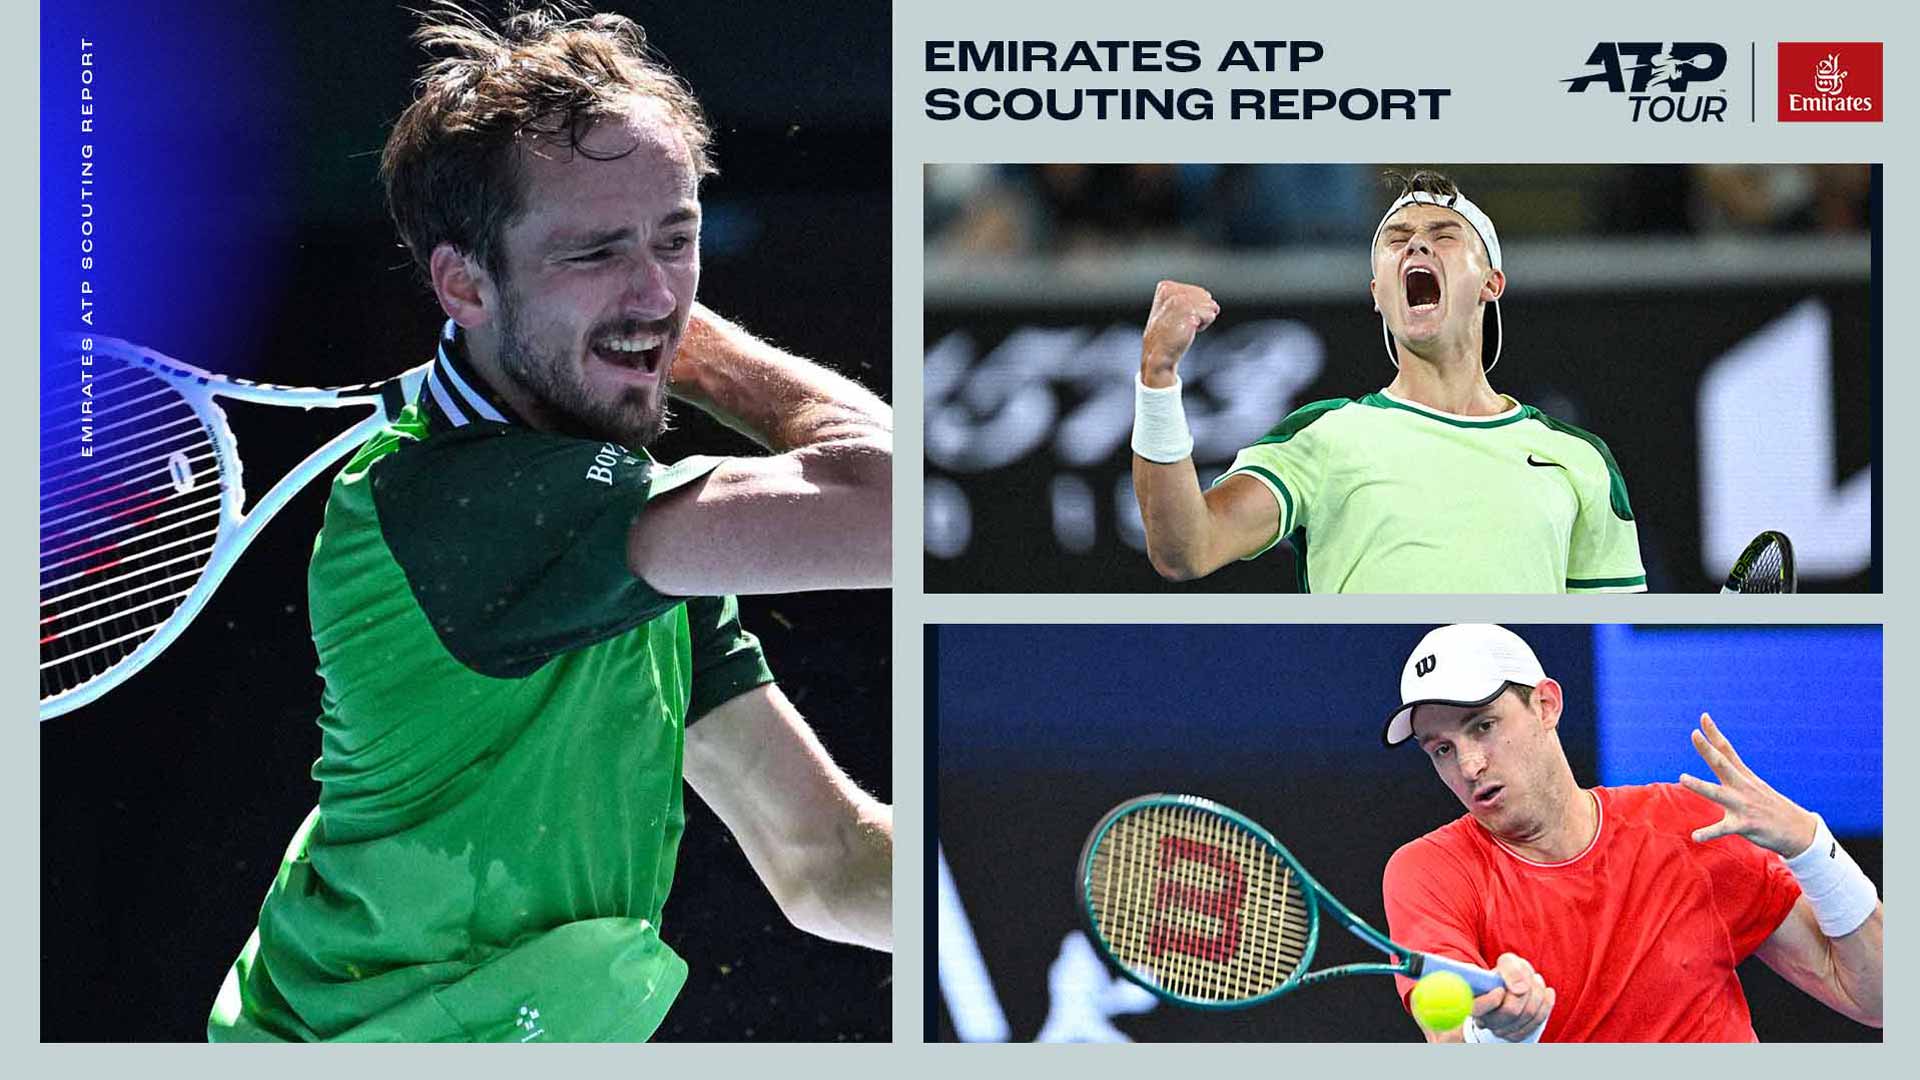 Scouting Report: Top 20 stars flock to Acapulco; Medvedev & Rublev in Dubai; Jarry leads Santiago